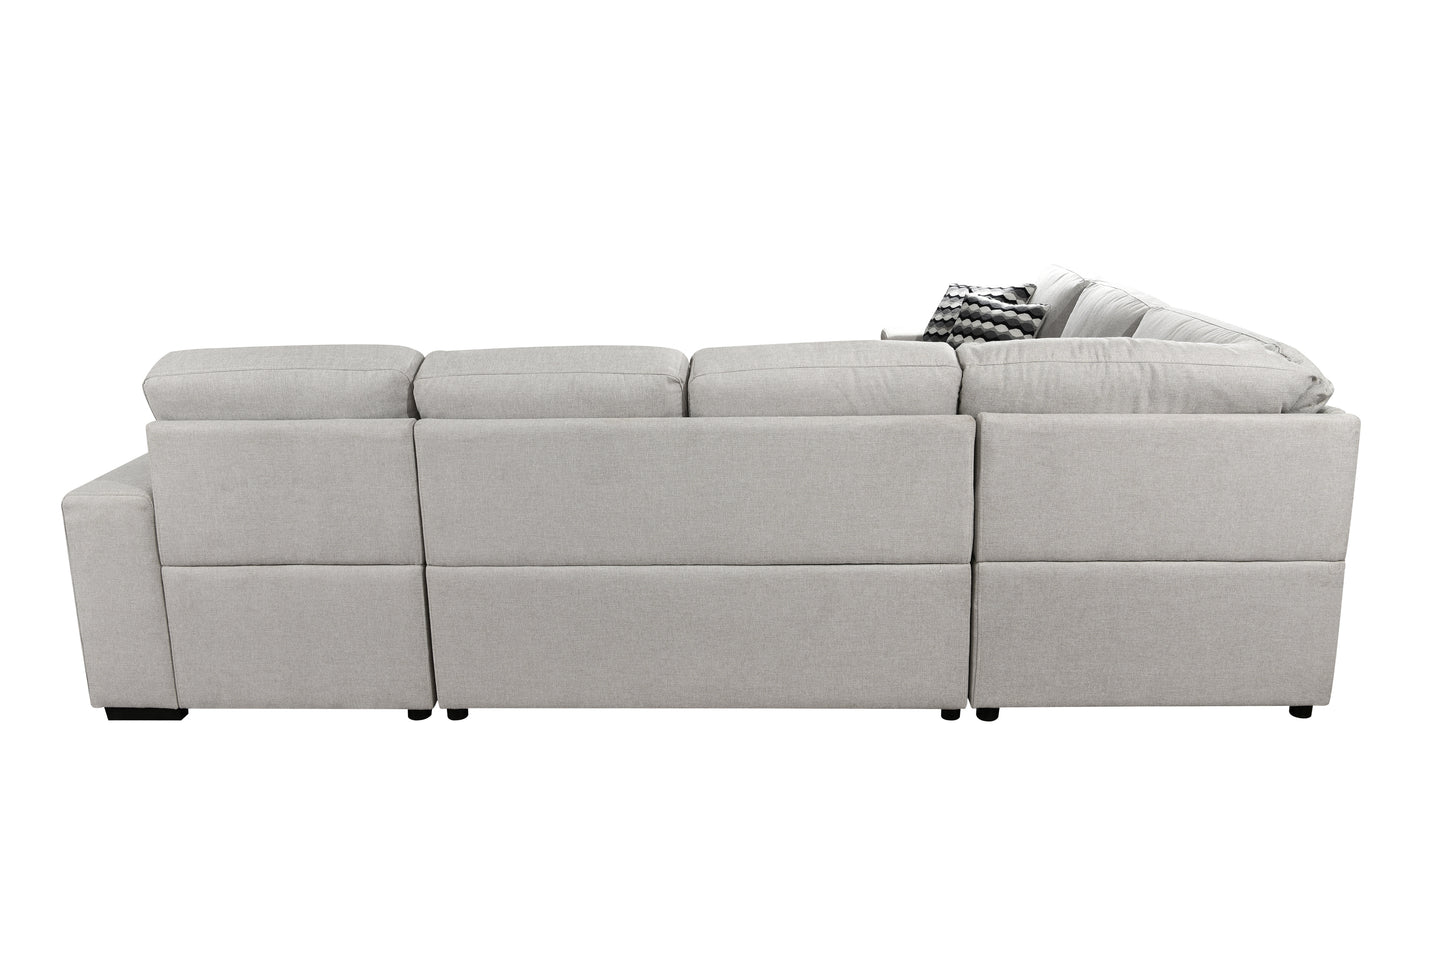 U-Shaped 7-Seat Sectional sleeper, Cabinet, Storage Chaise